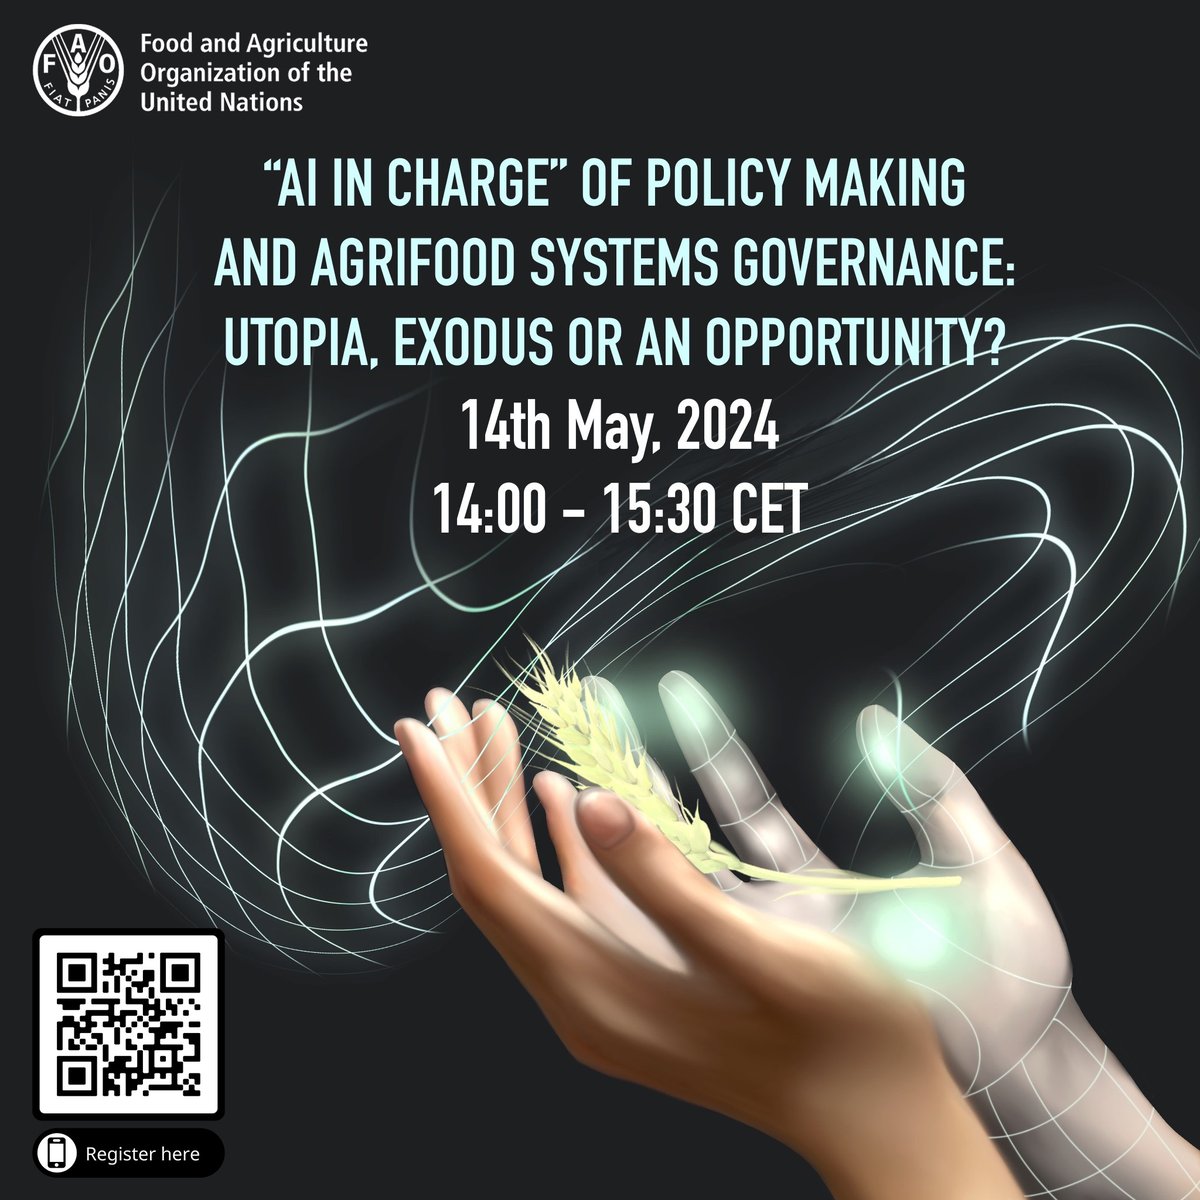 It's tomorrow! Let's talk about A.I in charge of Policy Making and Agrifood Systems Governance. Don't miss the opportunity to be part of this conversation. Register here : bit.ly/3WzOyyT